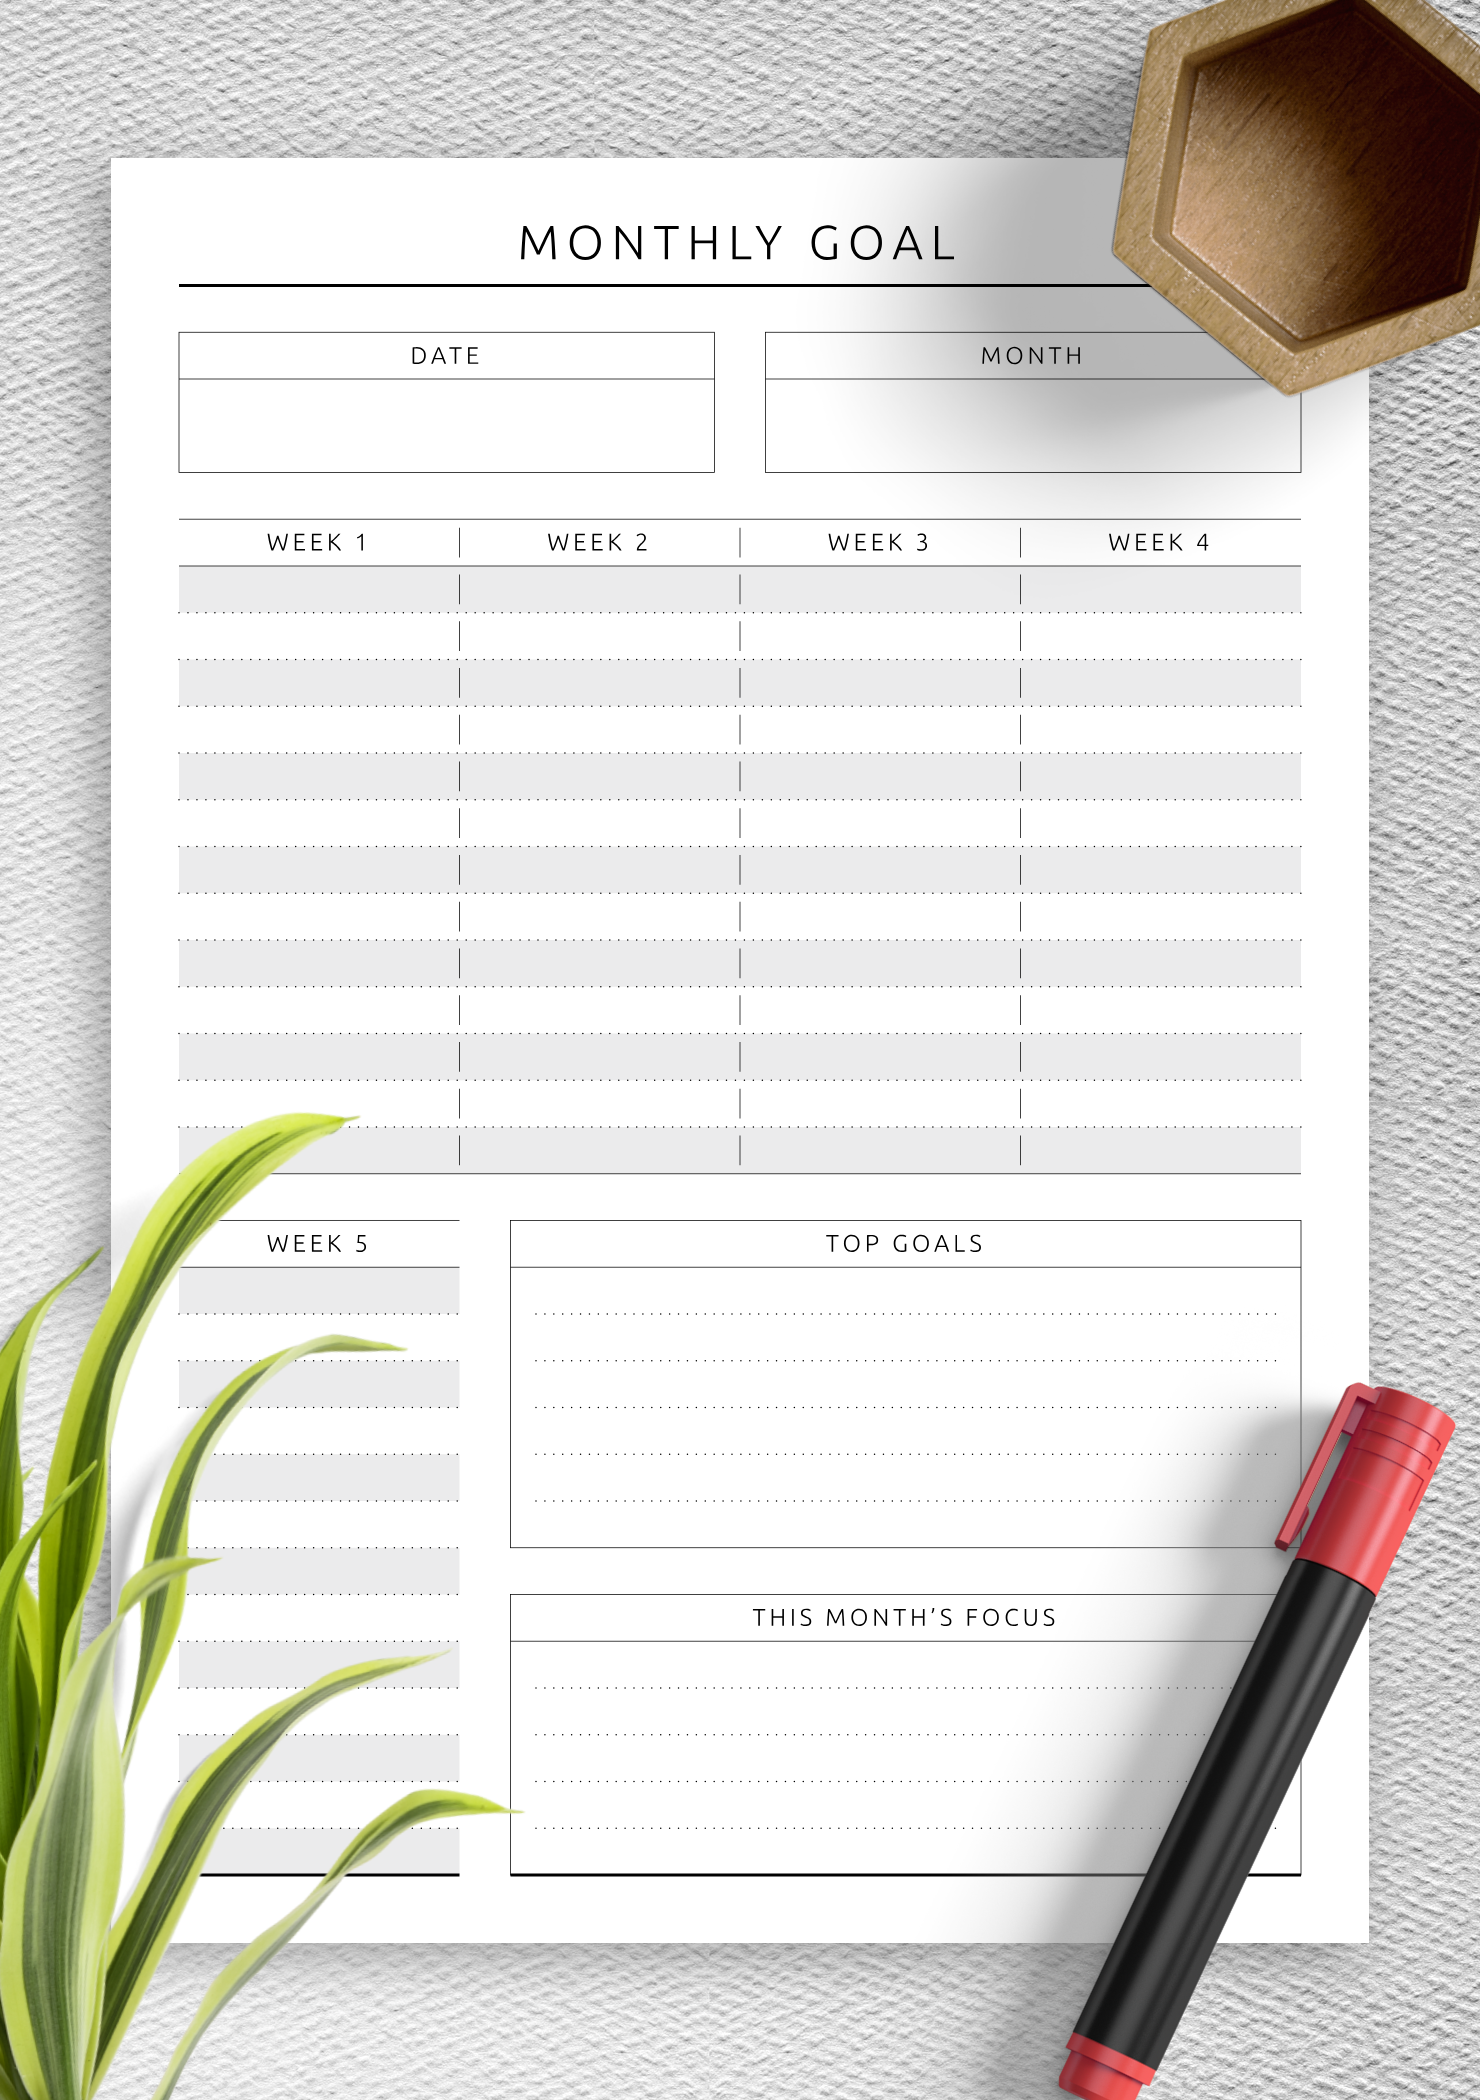 goal setting templates and goal planners download pdf - weekly goal